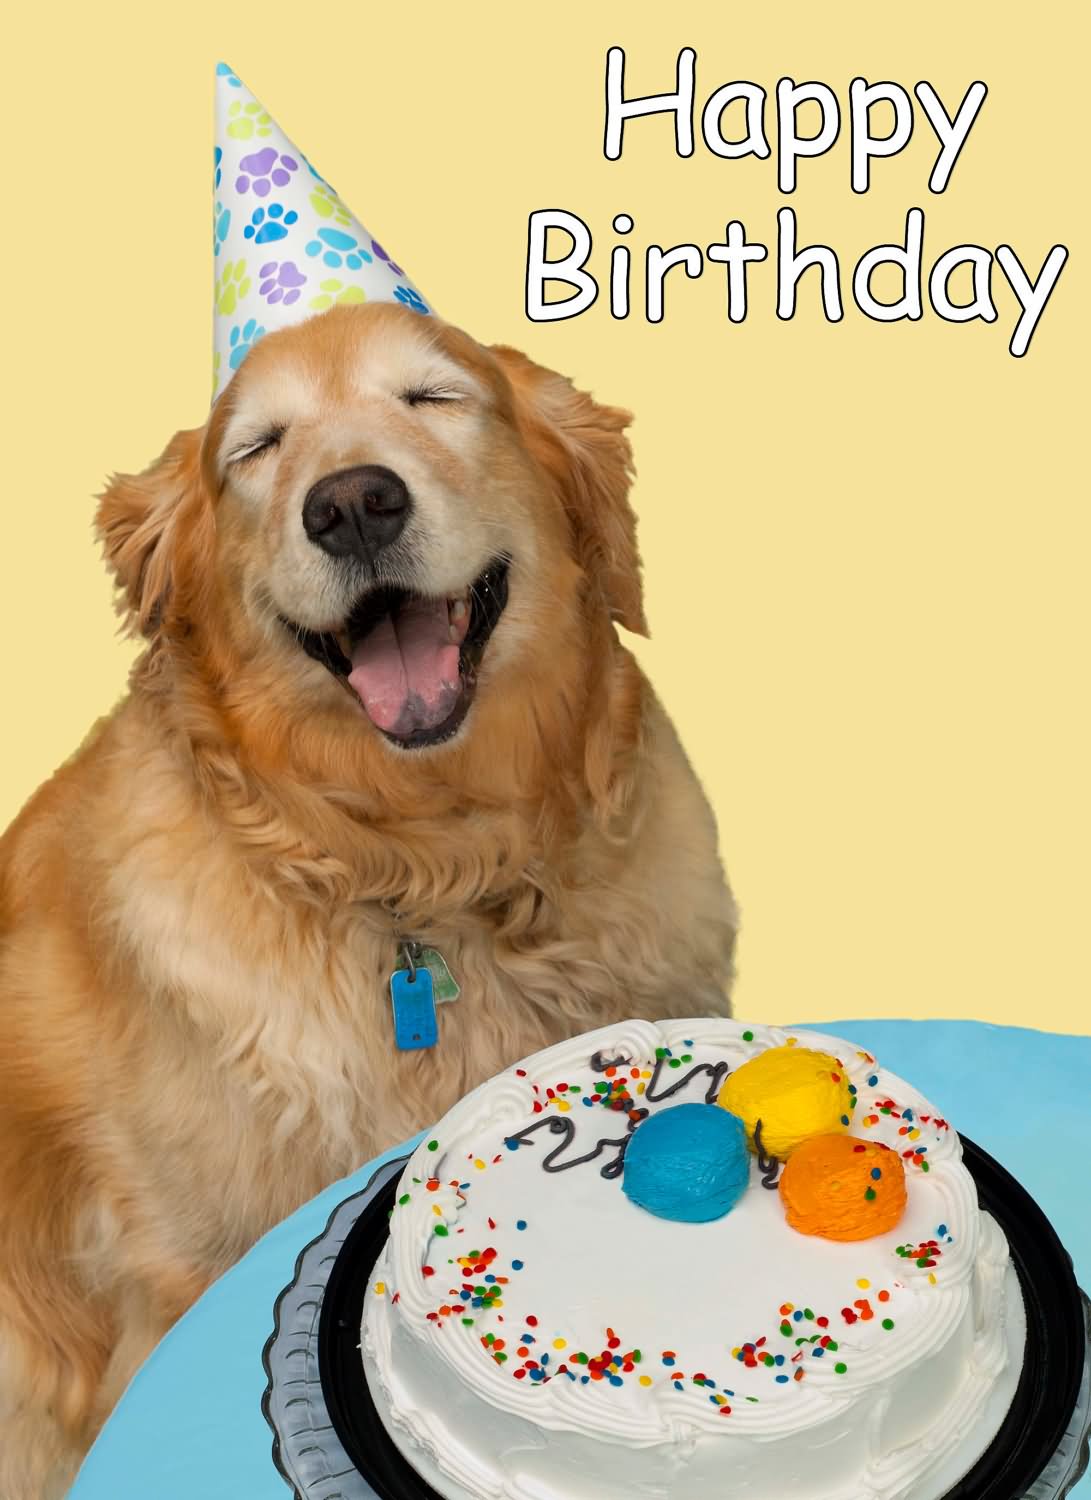 Download Birthday Images Funny Animals